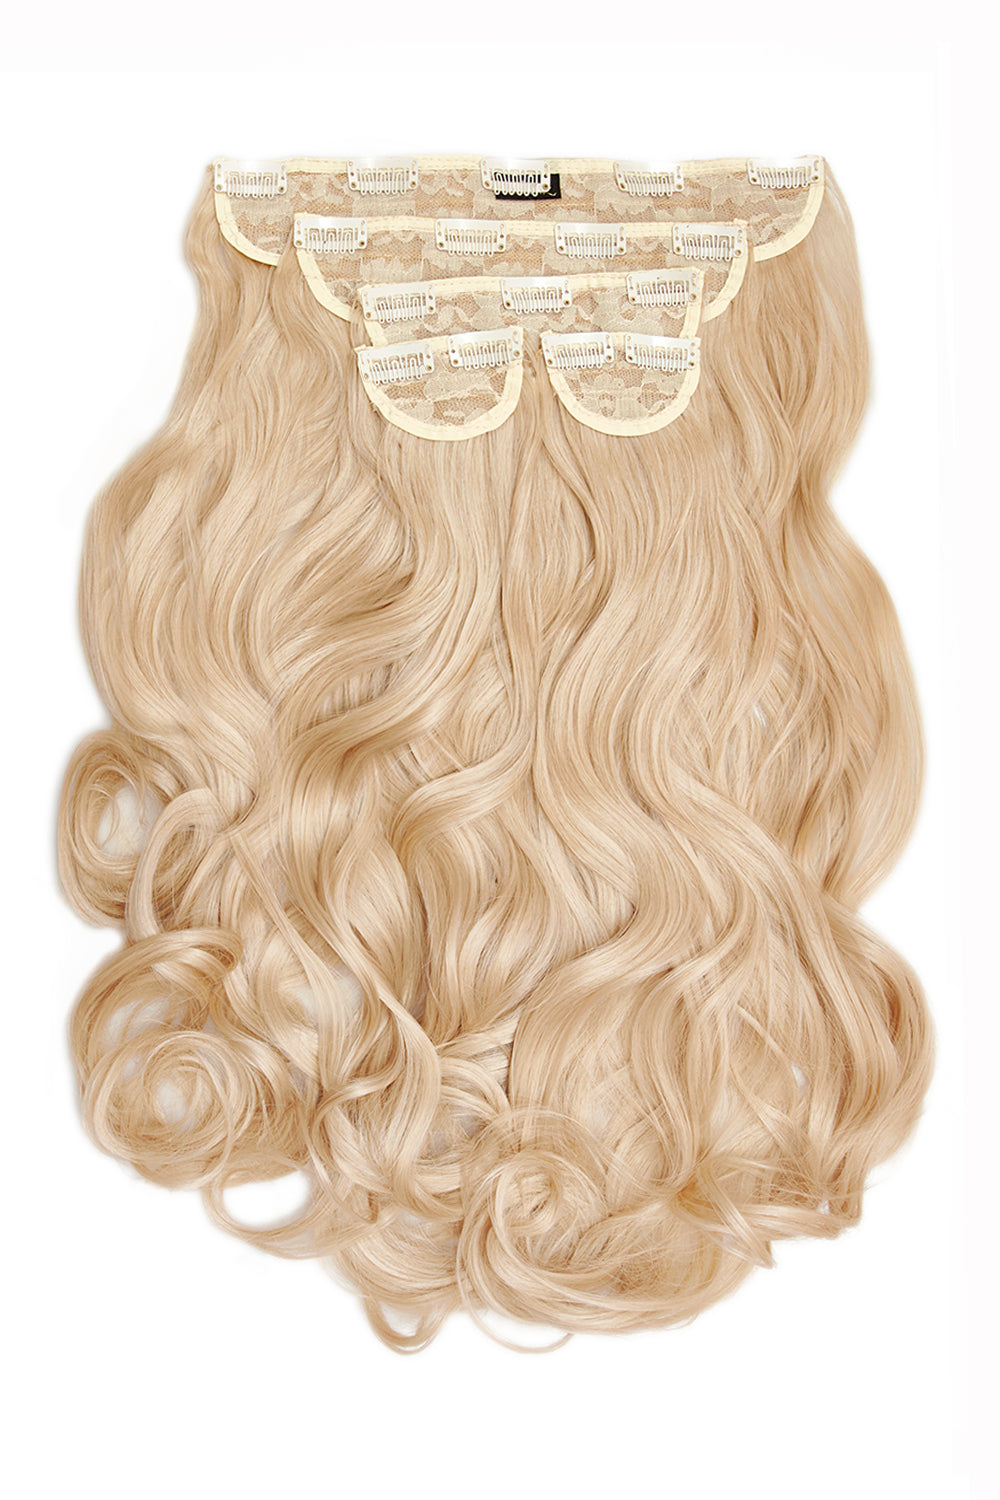 Super Thick 22" 5 Piece Curly Clip In Hair Extensions - Champagne Blonde